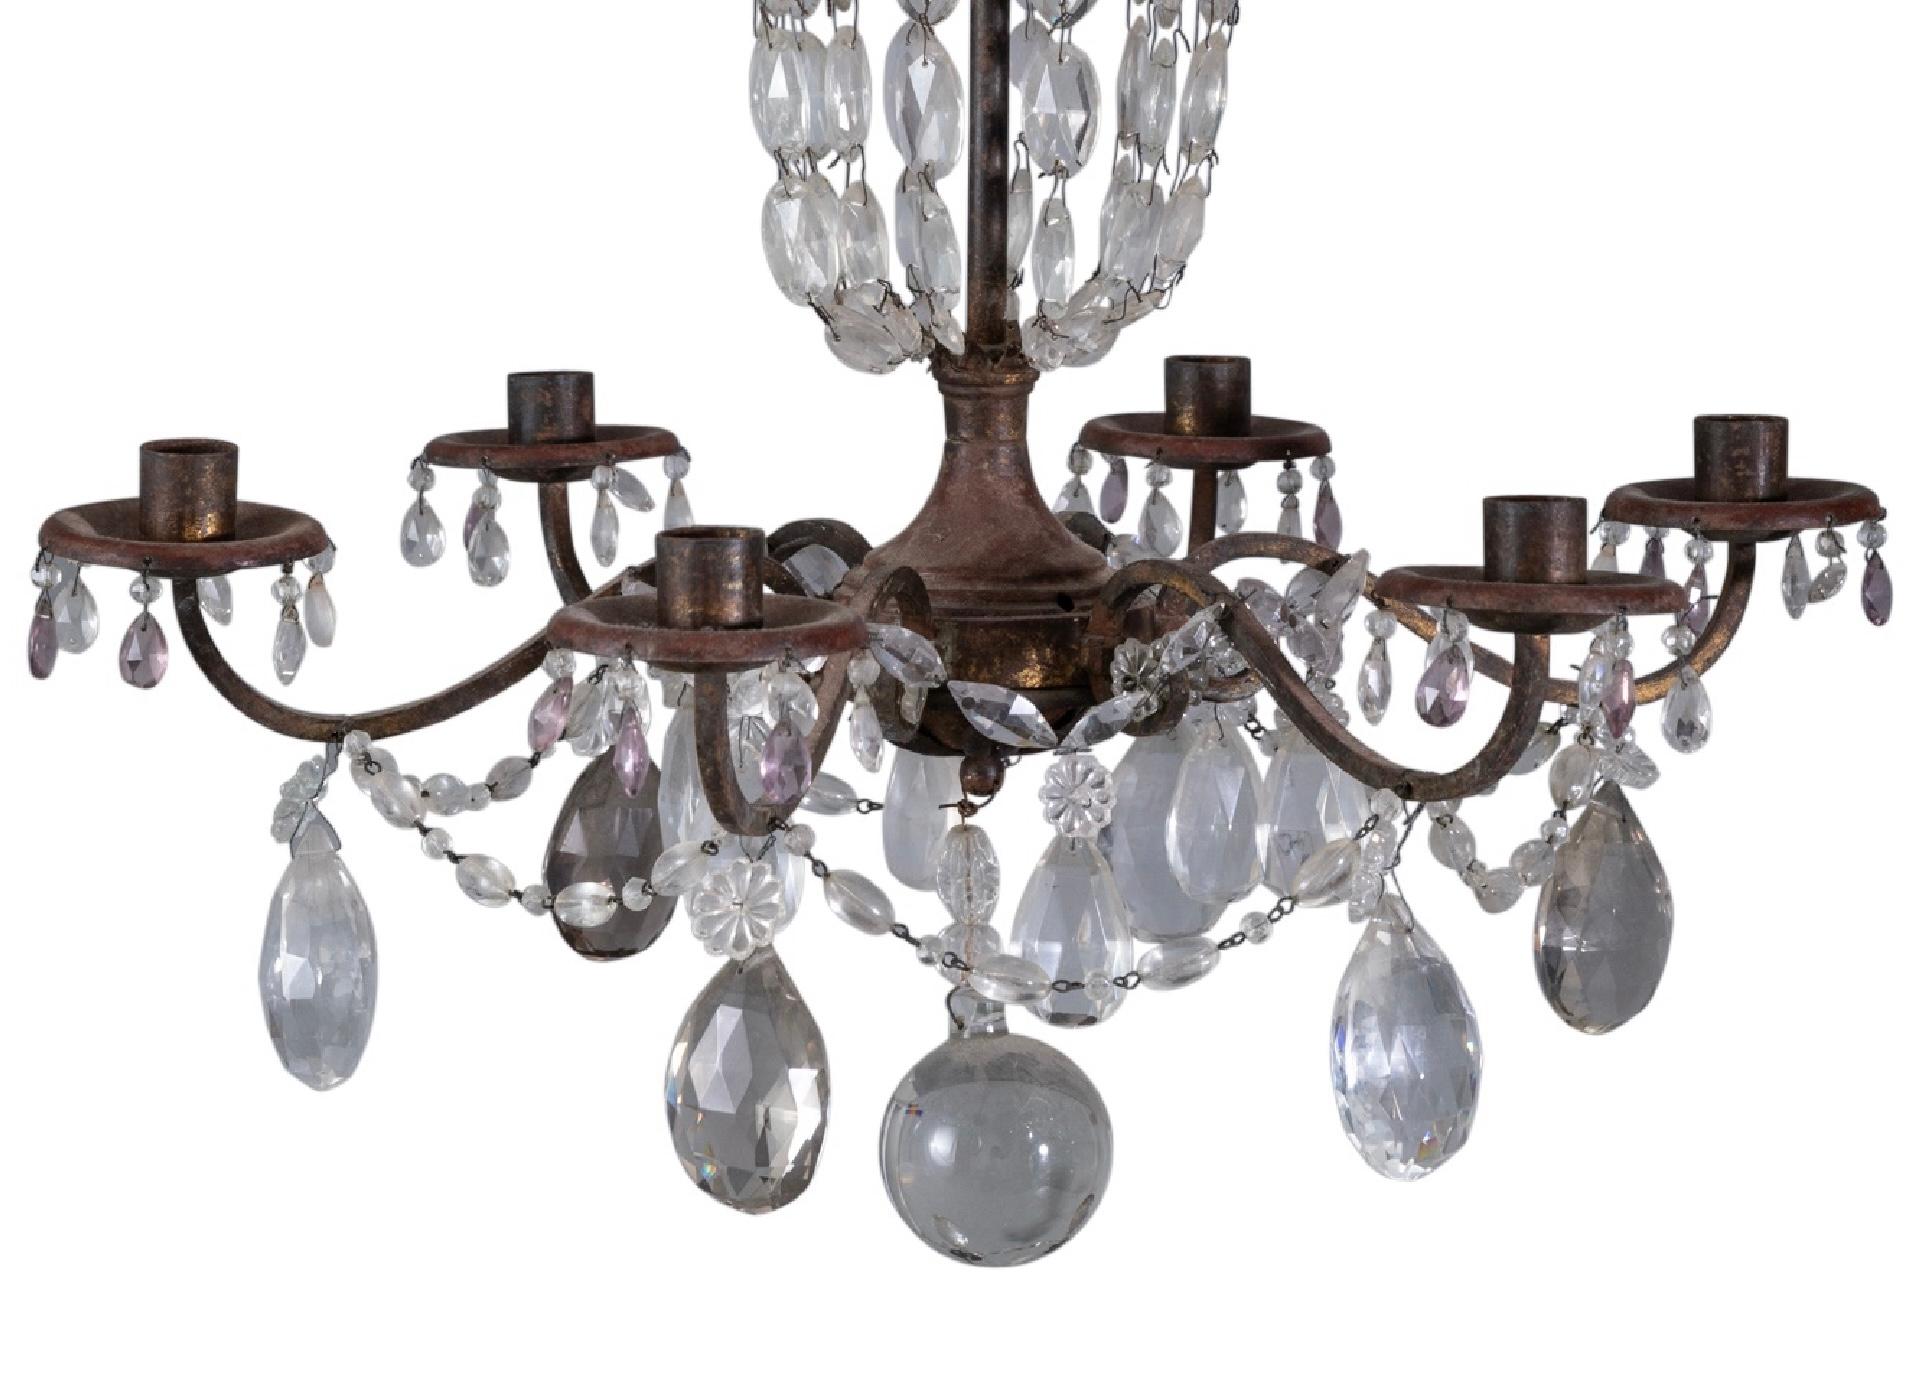 Early 20th century continental iron and cut glass six light chandelier. Chandelier features colorless glass pendants and beads. The iron has a not old mellow patina. Perfect for any setting.

